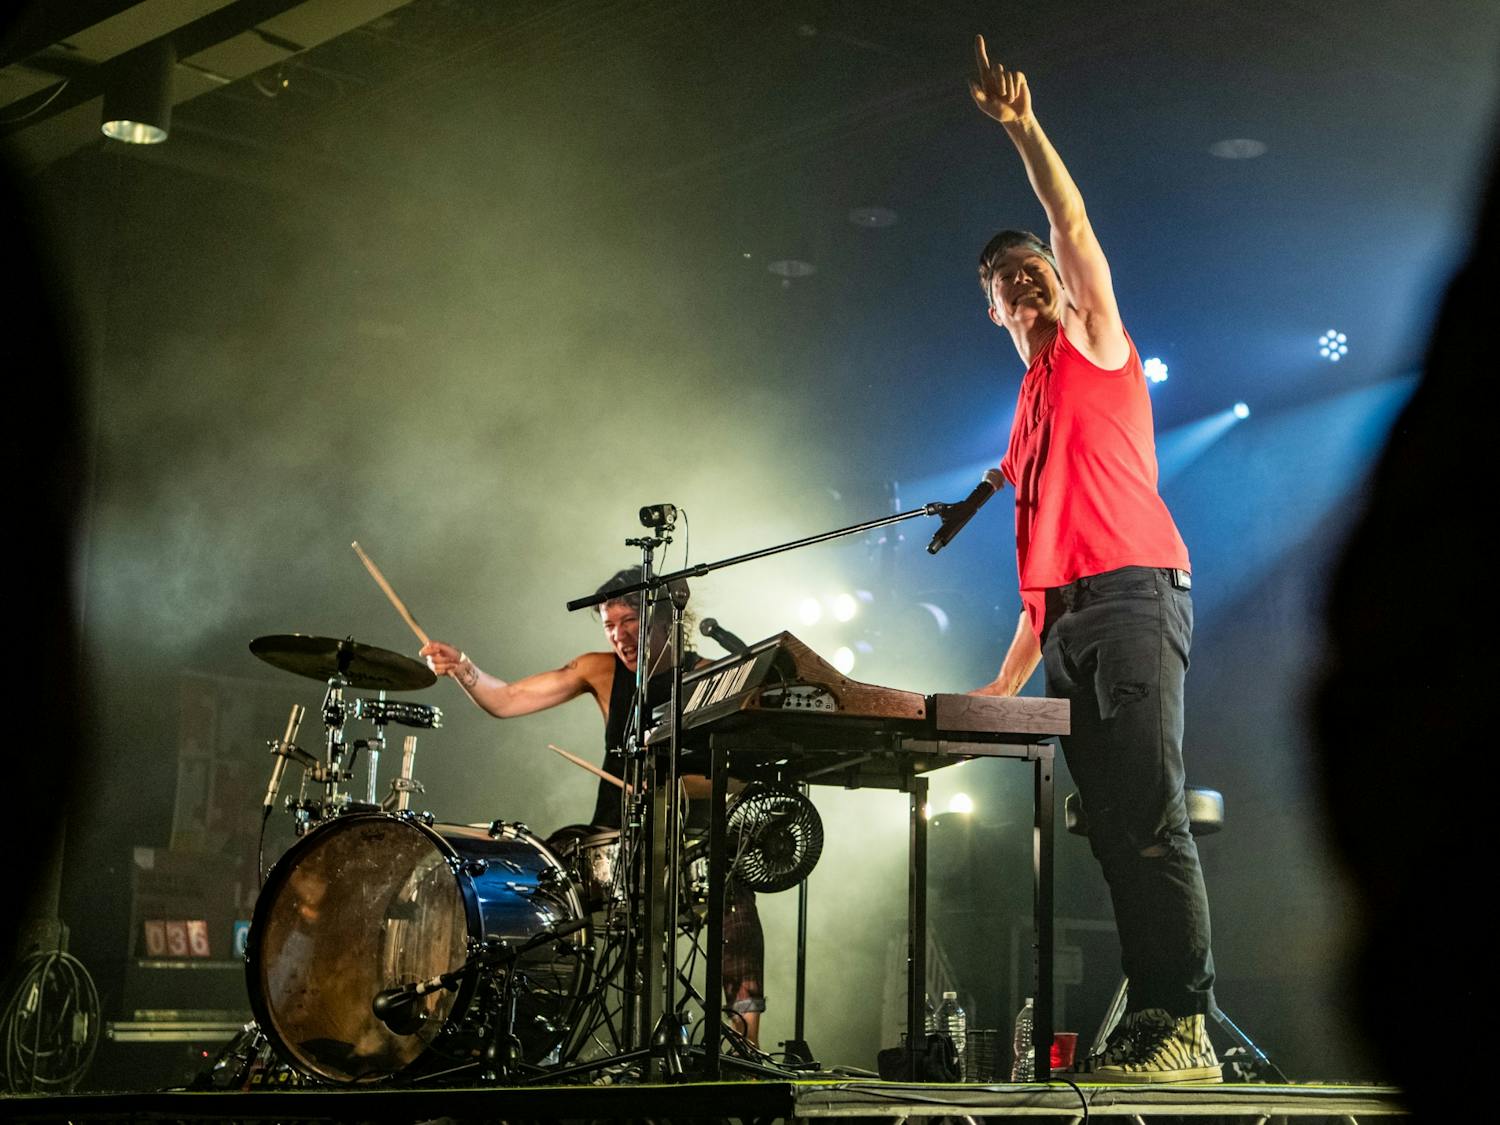 &nbsp;Kim Schifino (left) and Matt Johnson (right) hype up the crowd at a concert at The Senate. Matt and Kim is known for its upbeat dance music.